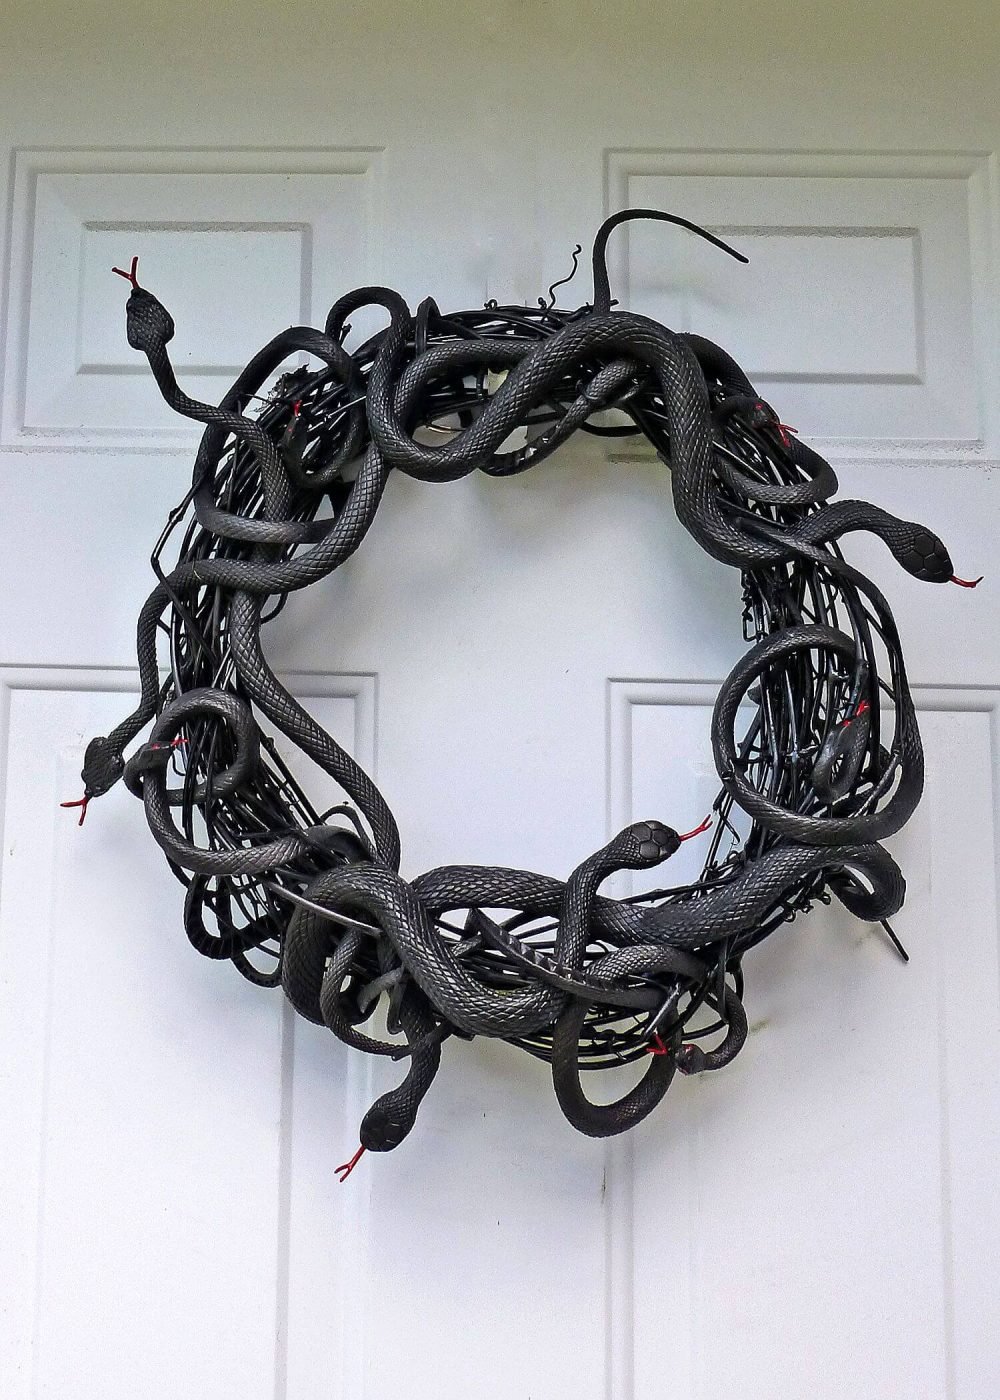 A wreath made out of wires and wires
